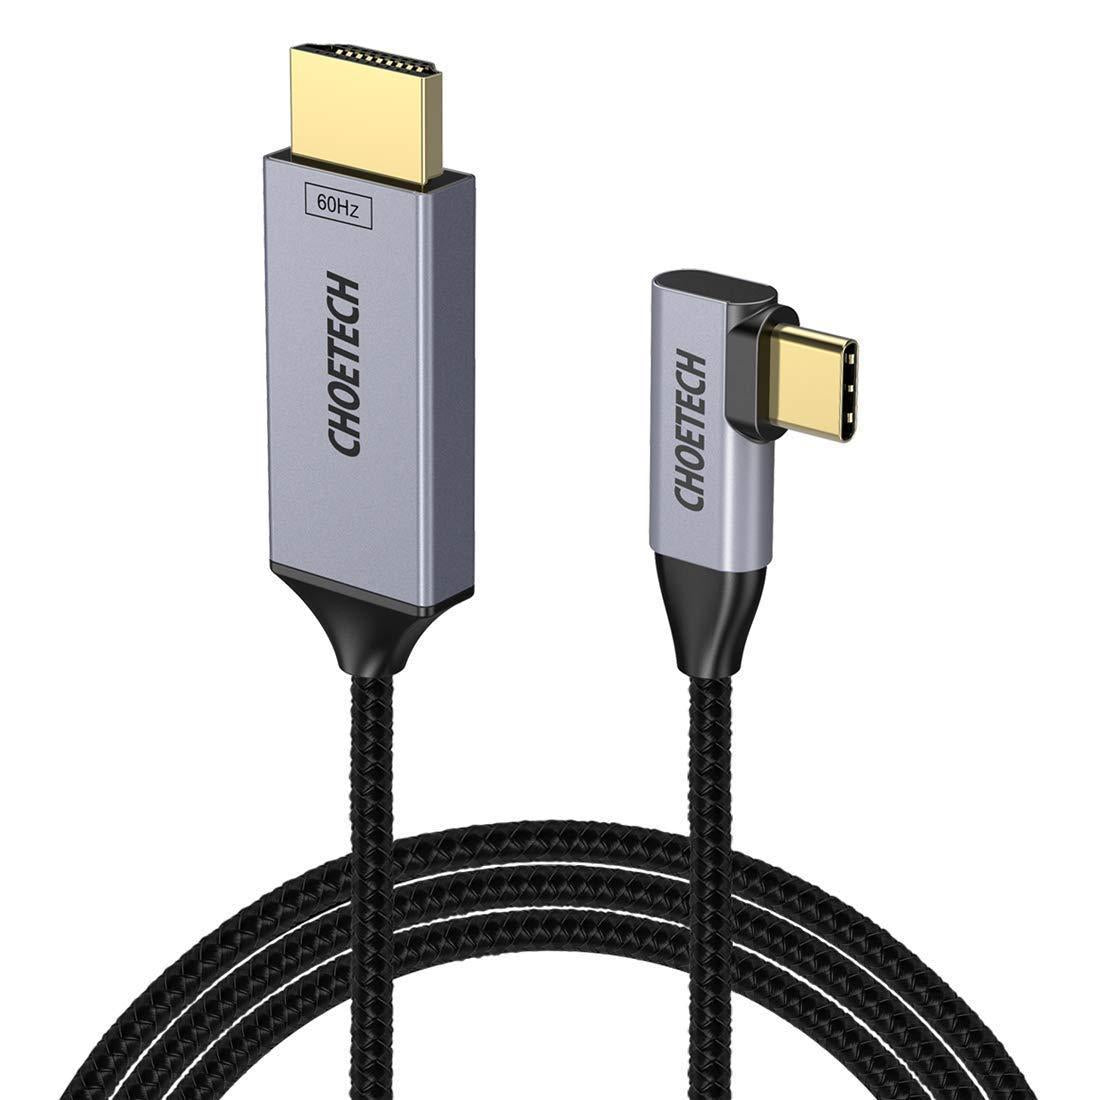 CHOETECH USB C to HDMI Cable(4K@60Hz) 1.8m USB Type-C to HDMI Braided Adapter Cable